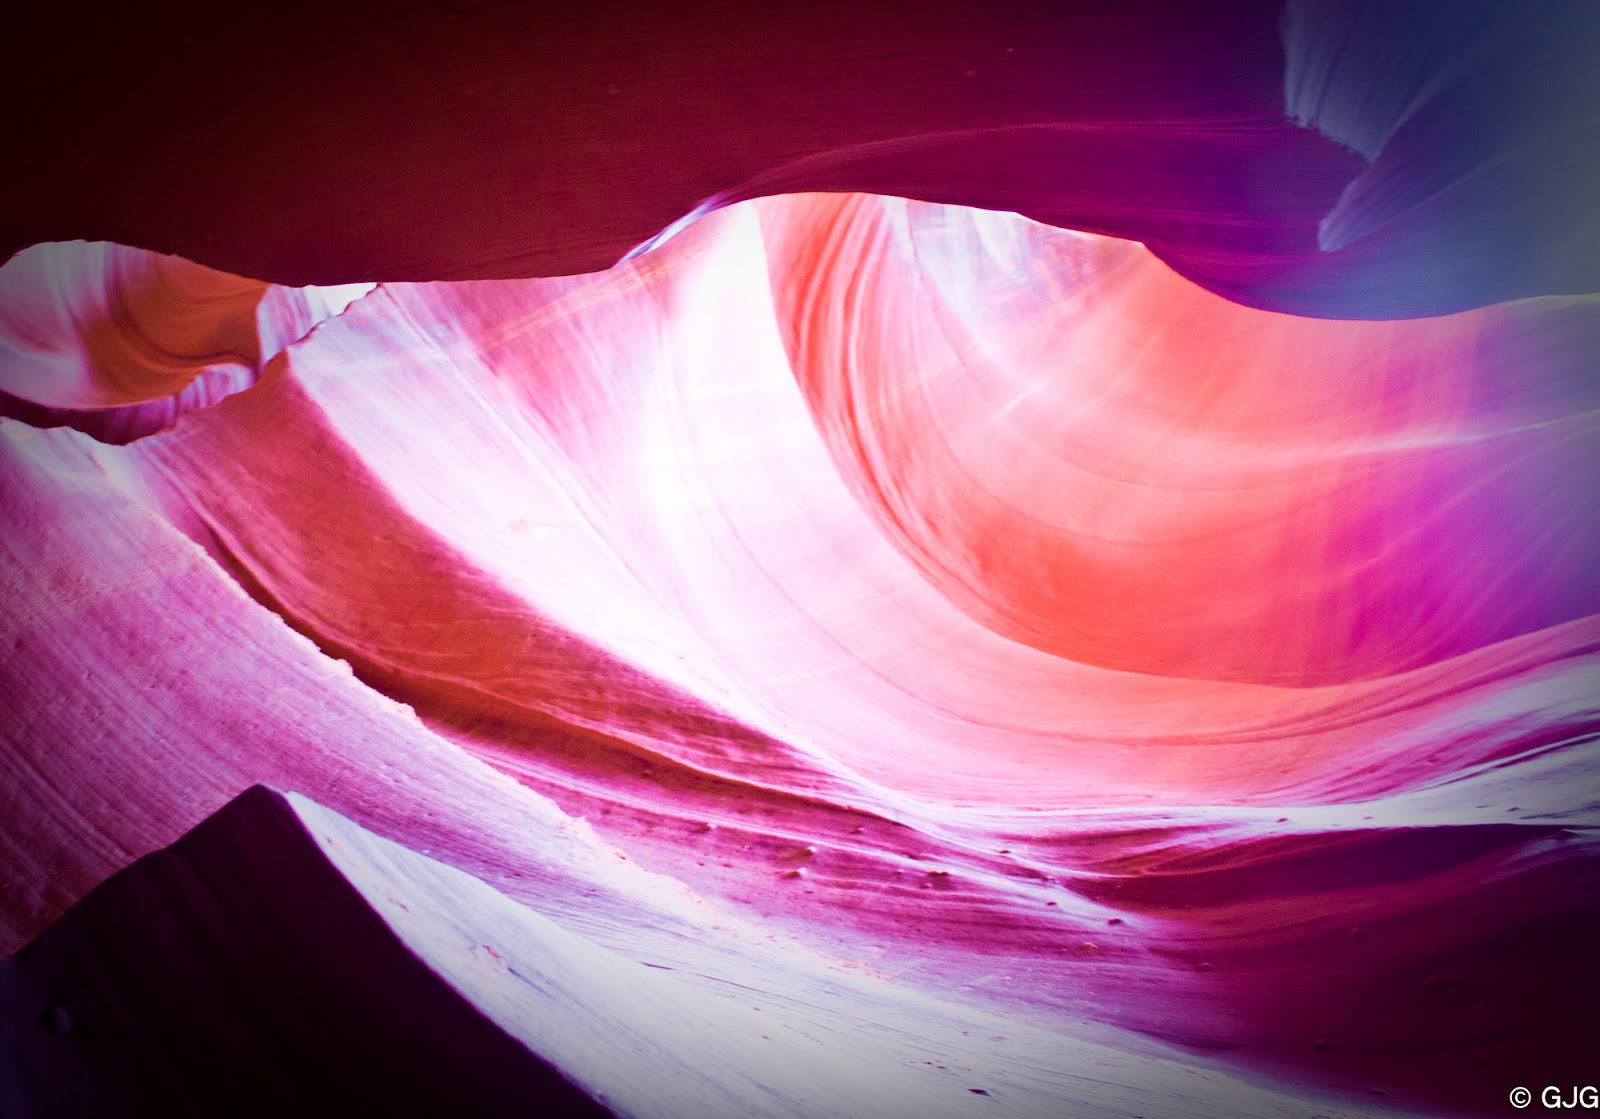 The Lower Antelope Canyon: Things To Do in Arizona, USA